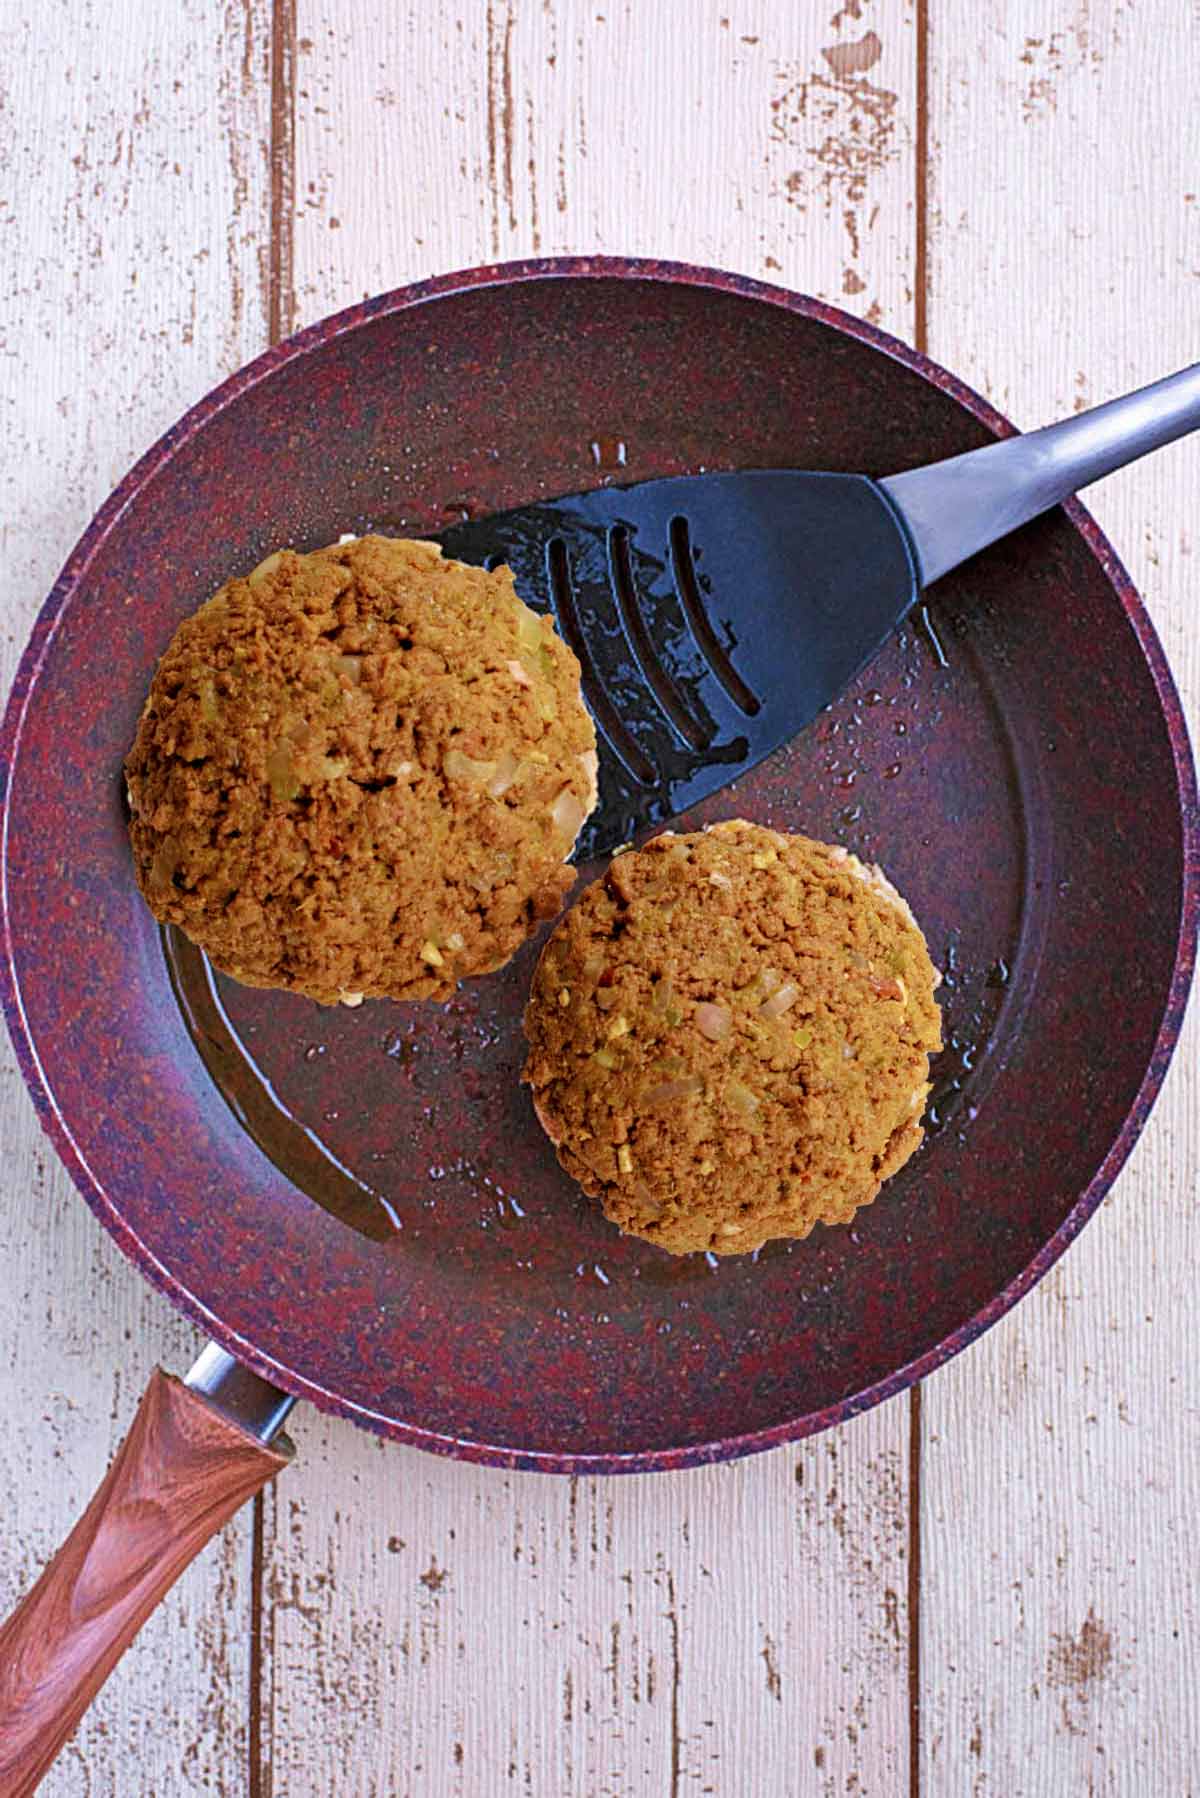 Two meat free quorn burgers cooking in a frying pan. one is about to be flipped.